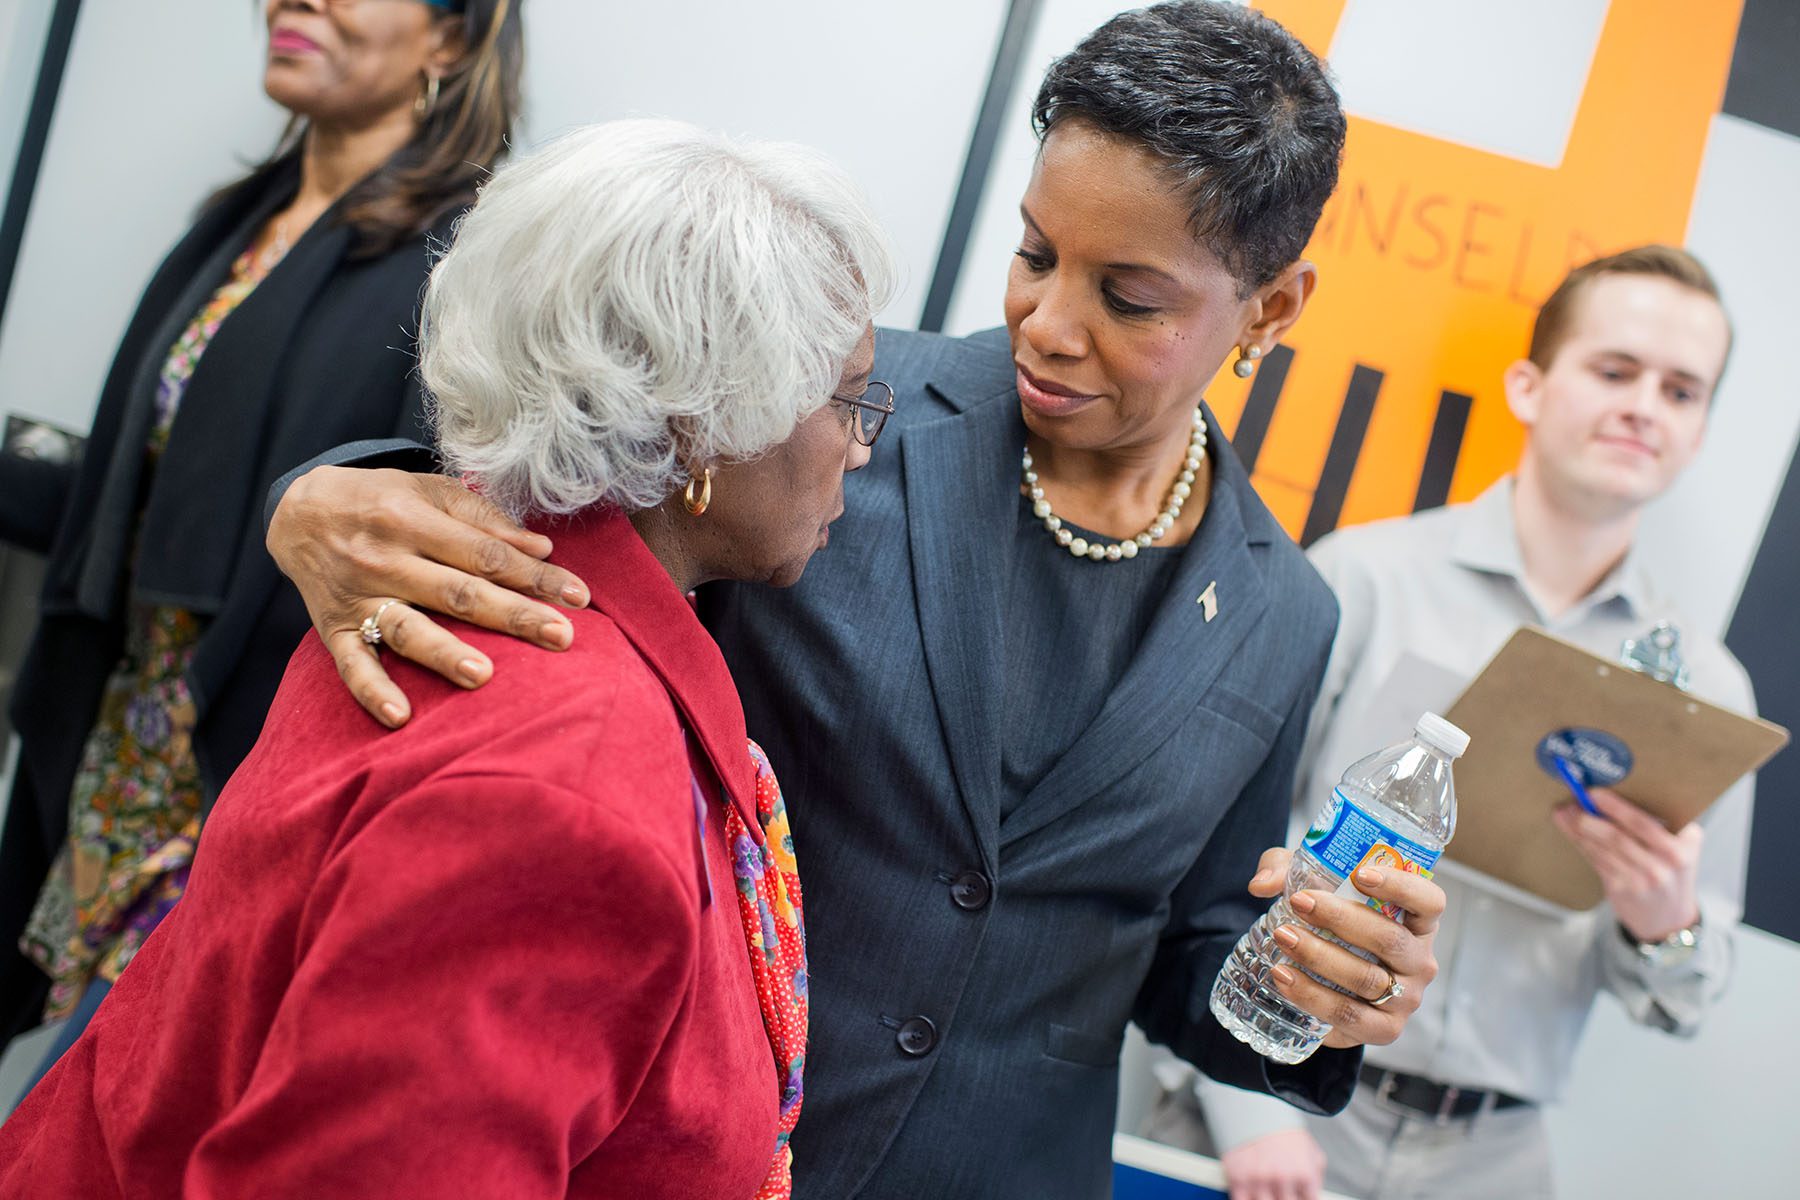 Donna Edwards puts her arm around an older woman as they speak.